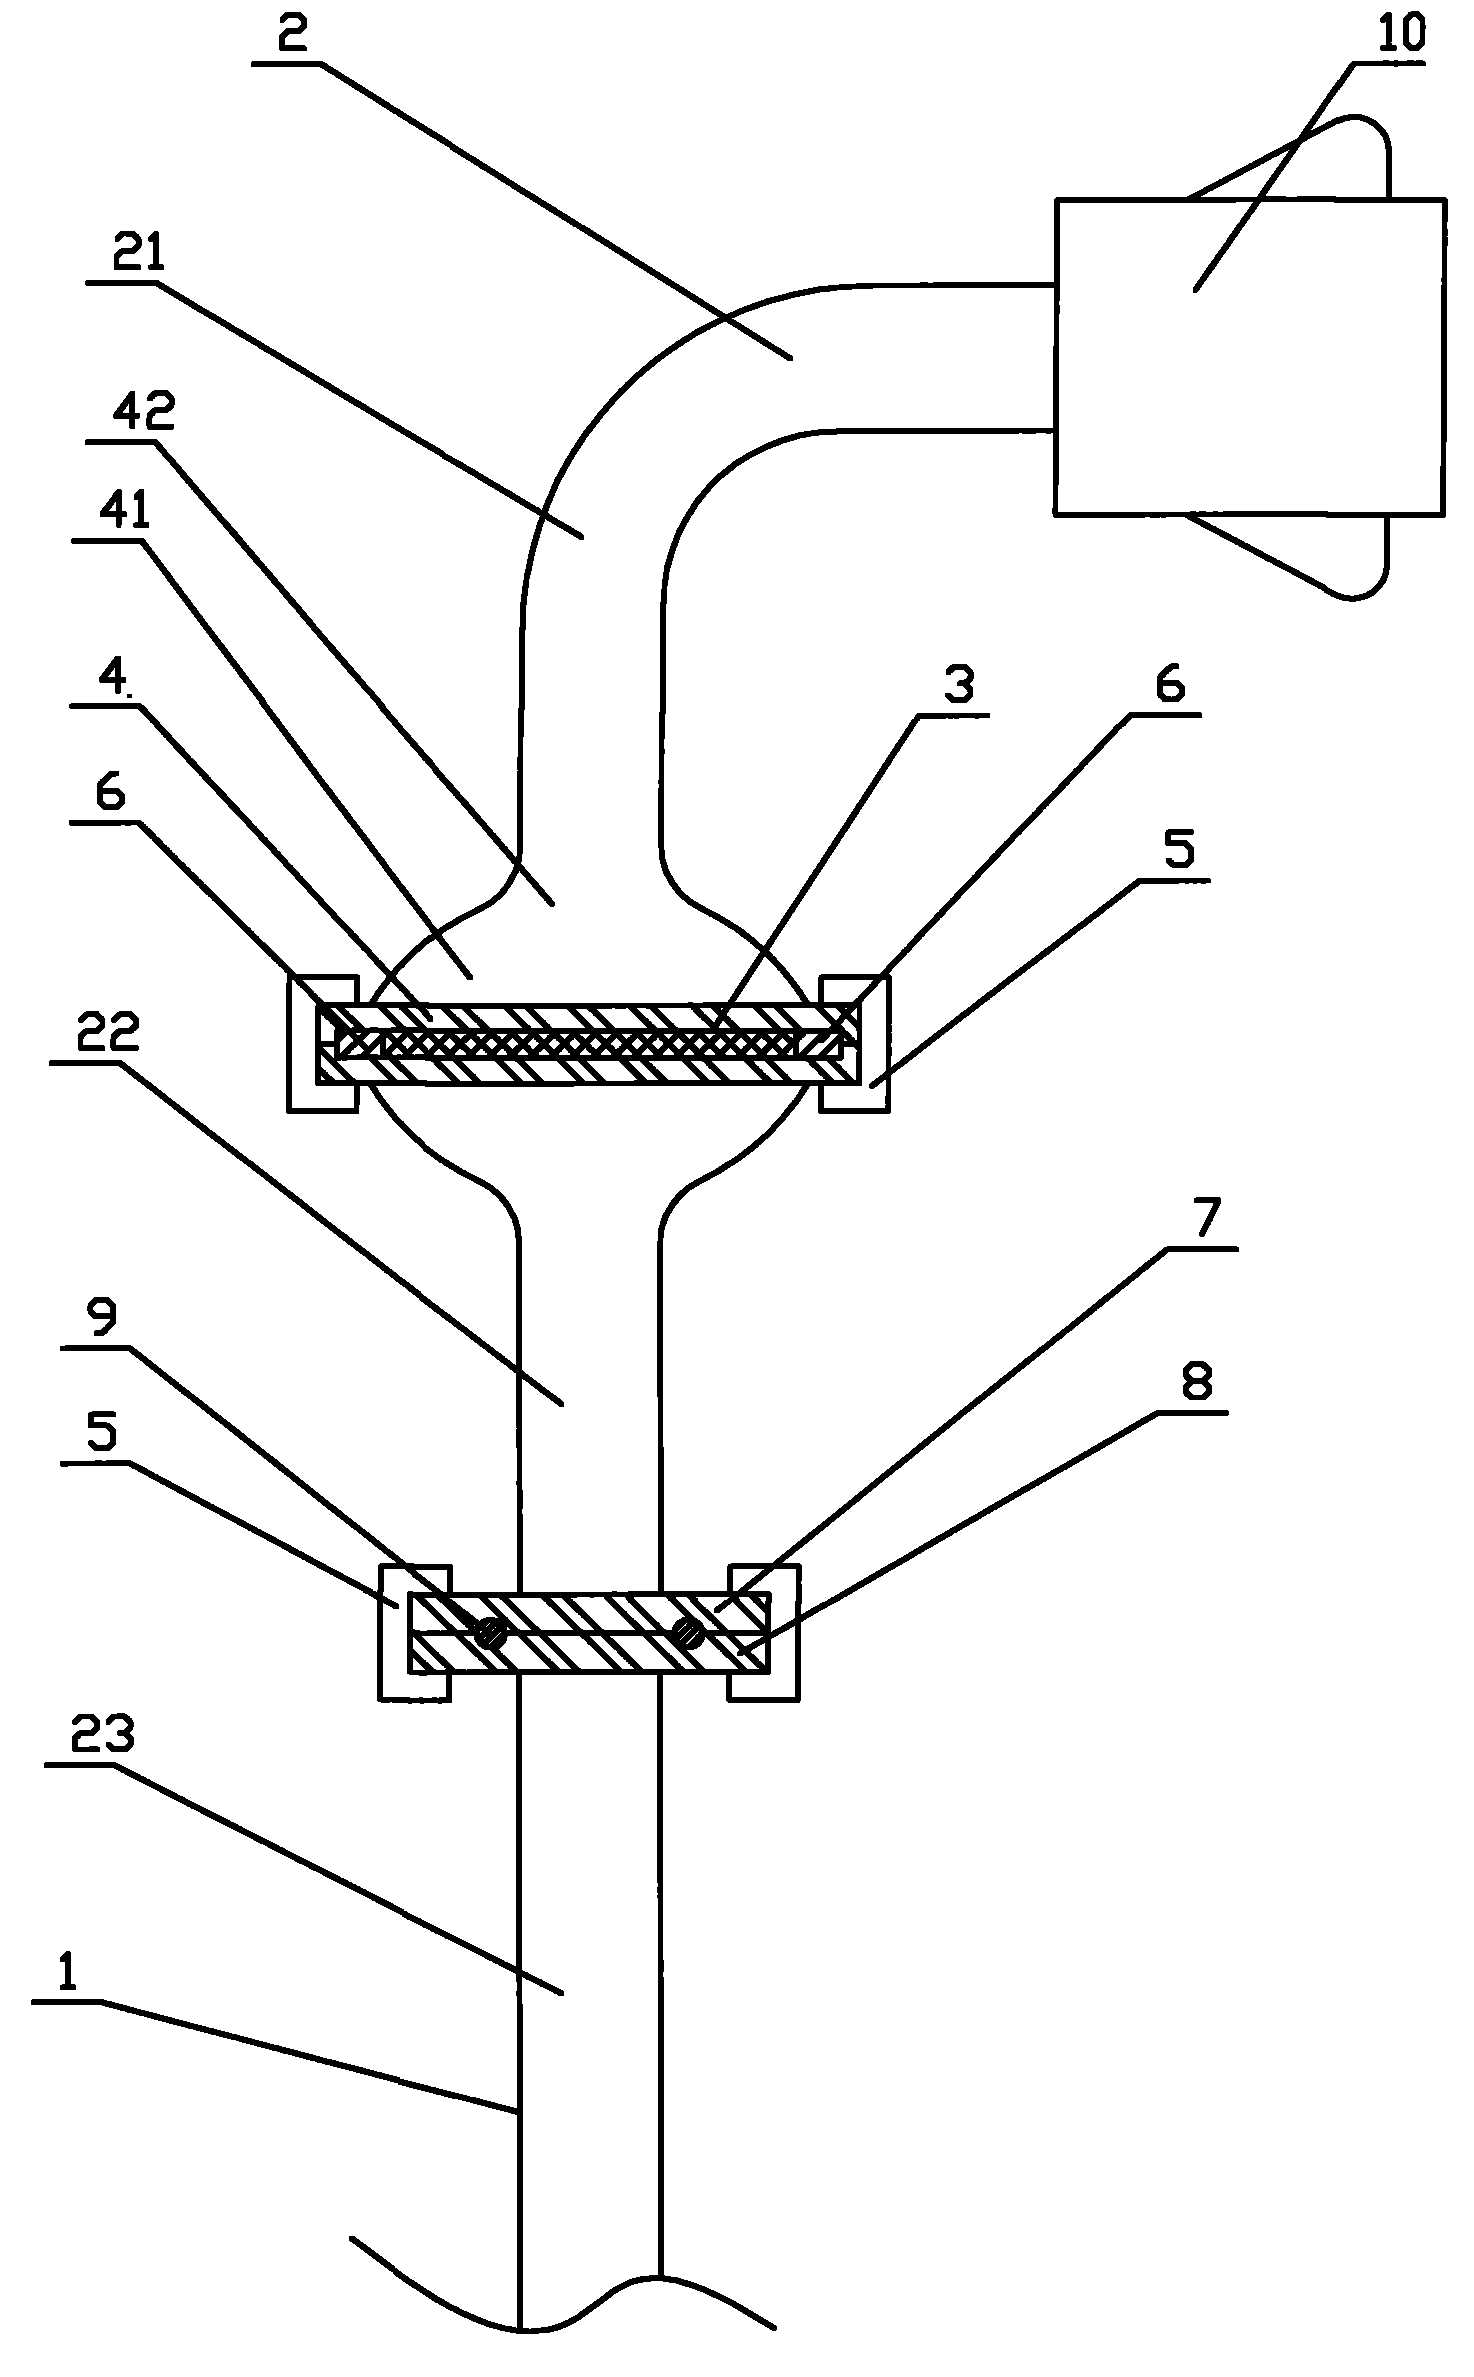 Feeding and filtering device for homogenizer